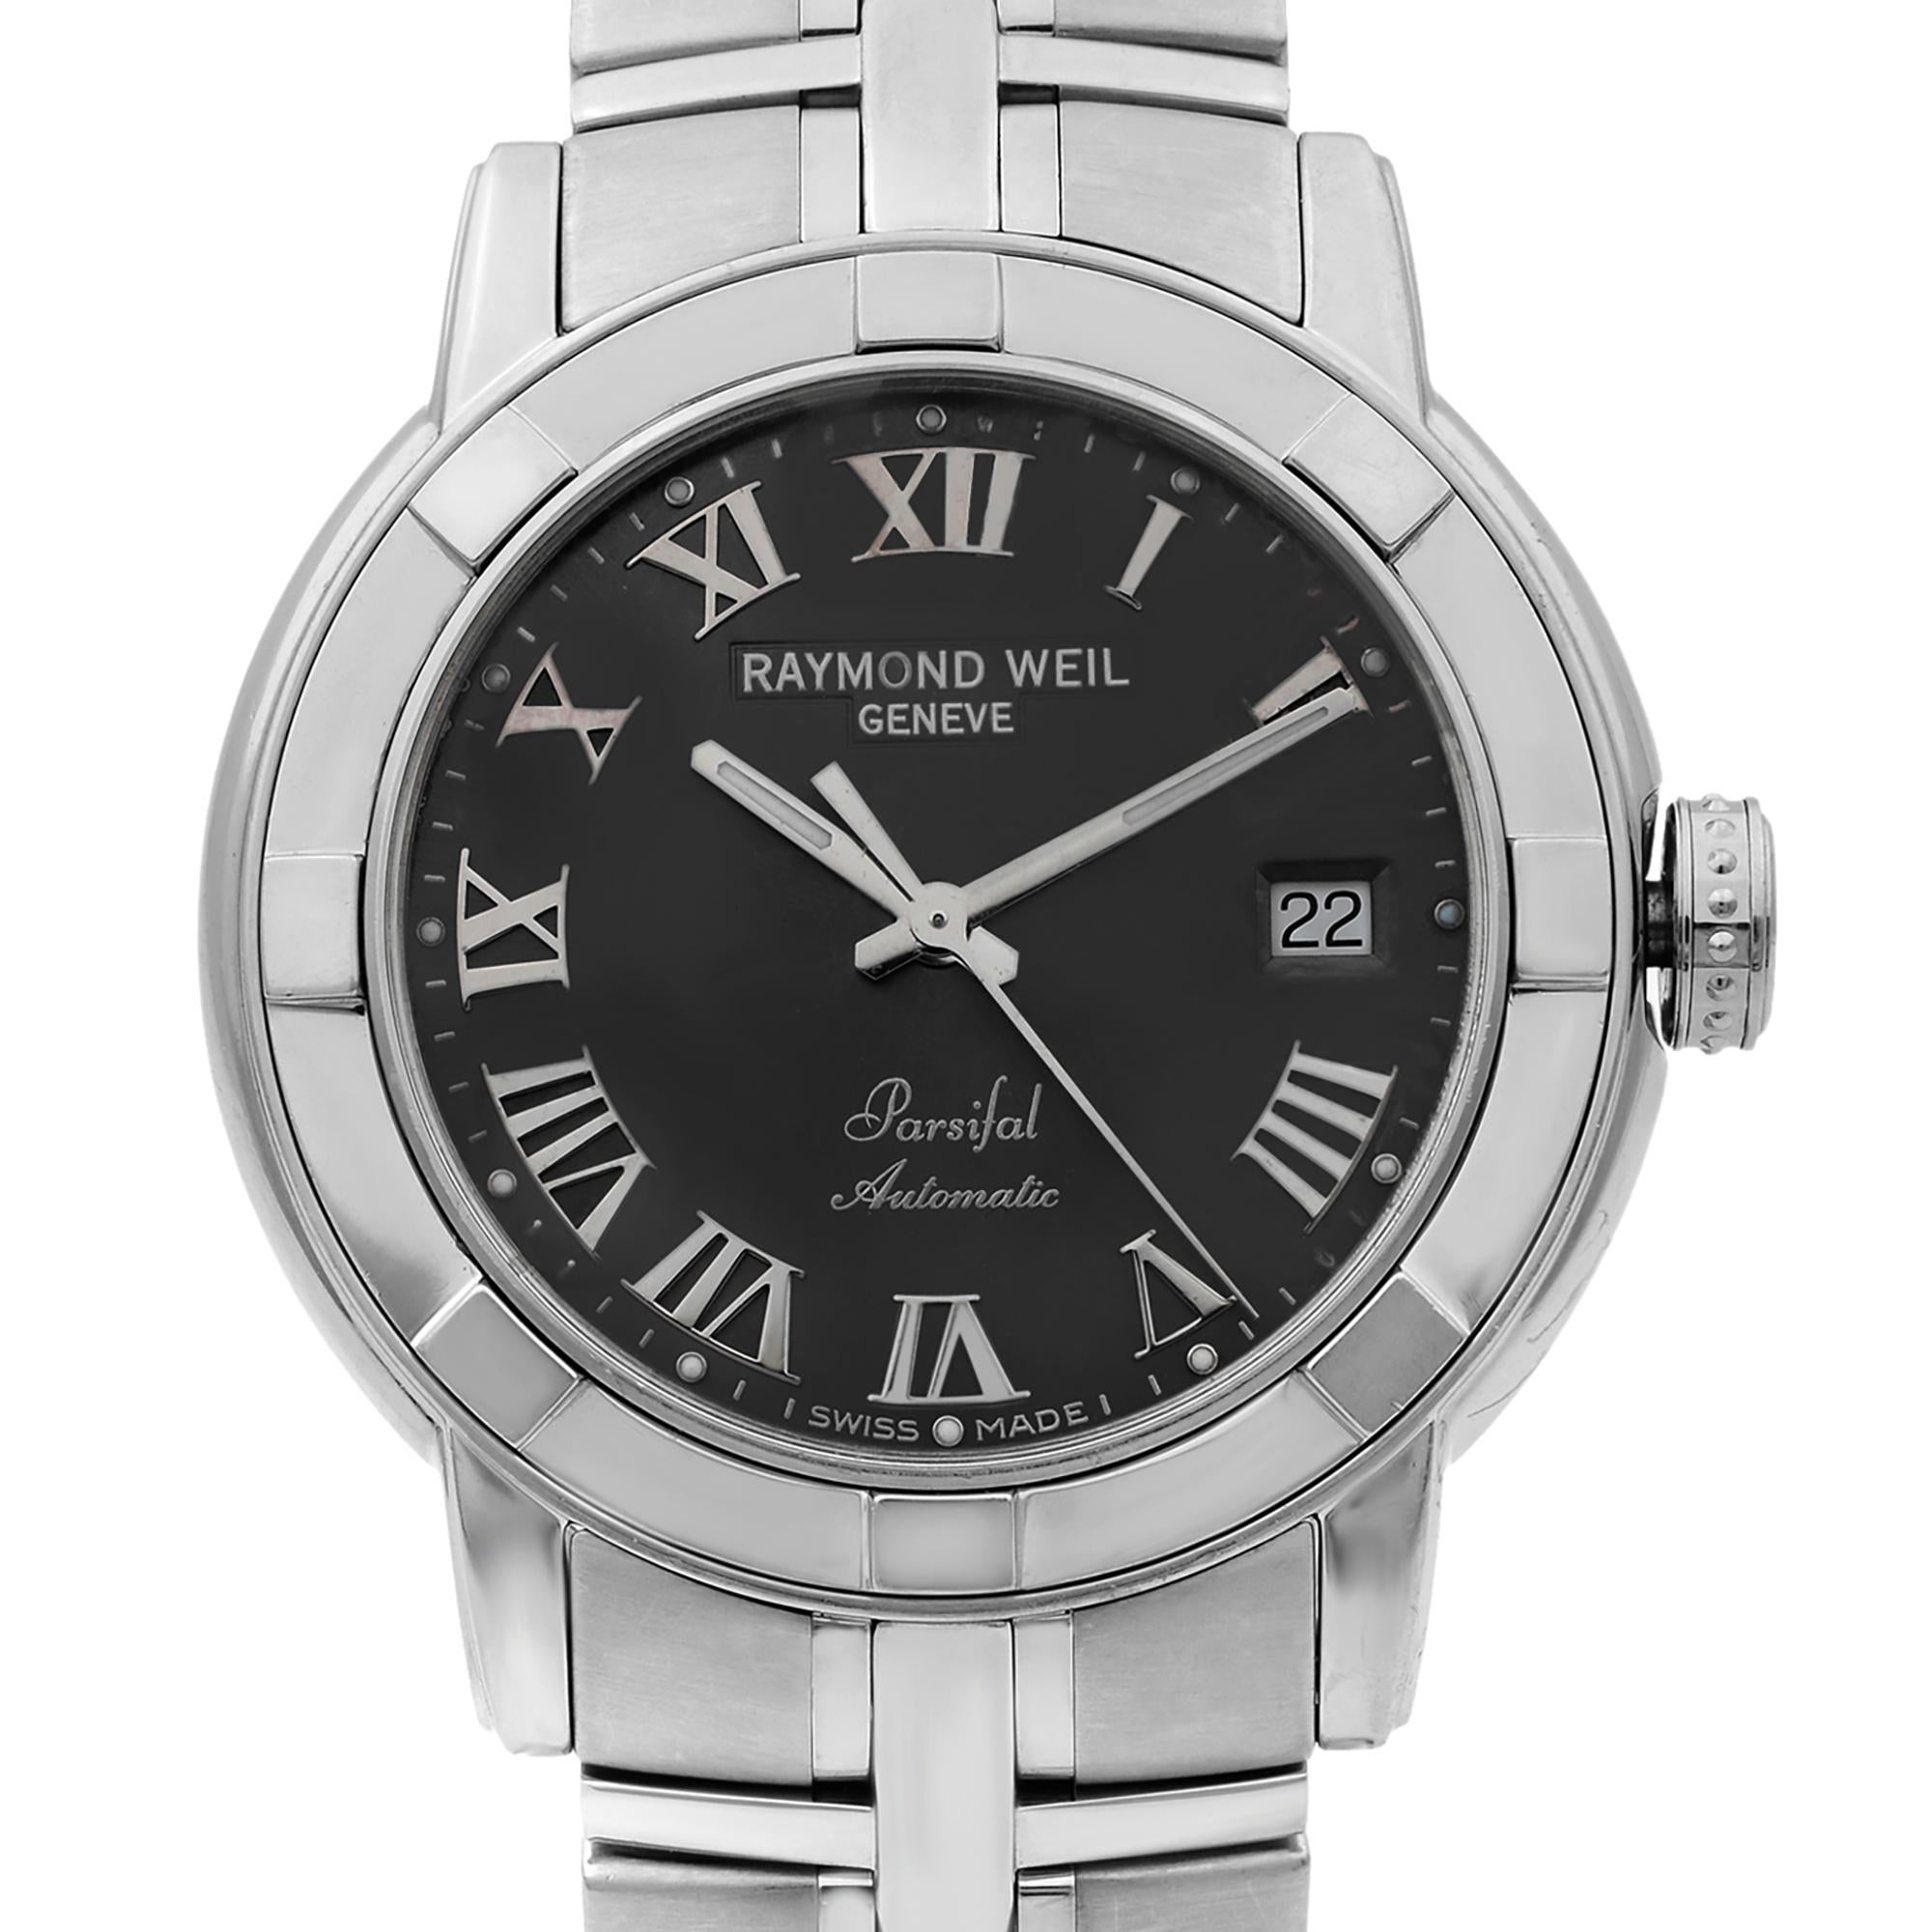 This pre-owned Raymond Weil Parsifal 2841-ST-00608 is a beautiful men's timepiece that is powered by mechanical (automatic) movement which is cased in a stainless steel case. It has a round shape face, date indicator dial and has hand roman numerals